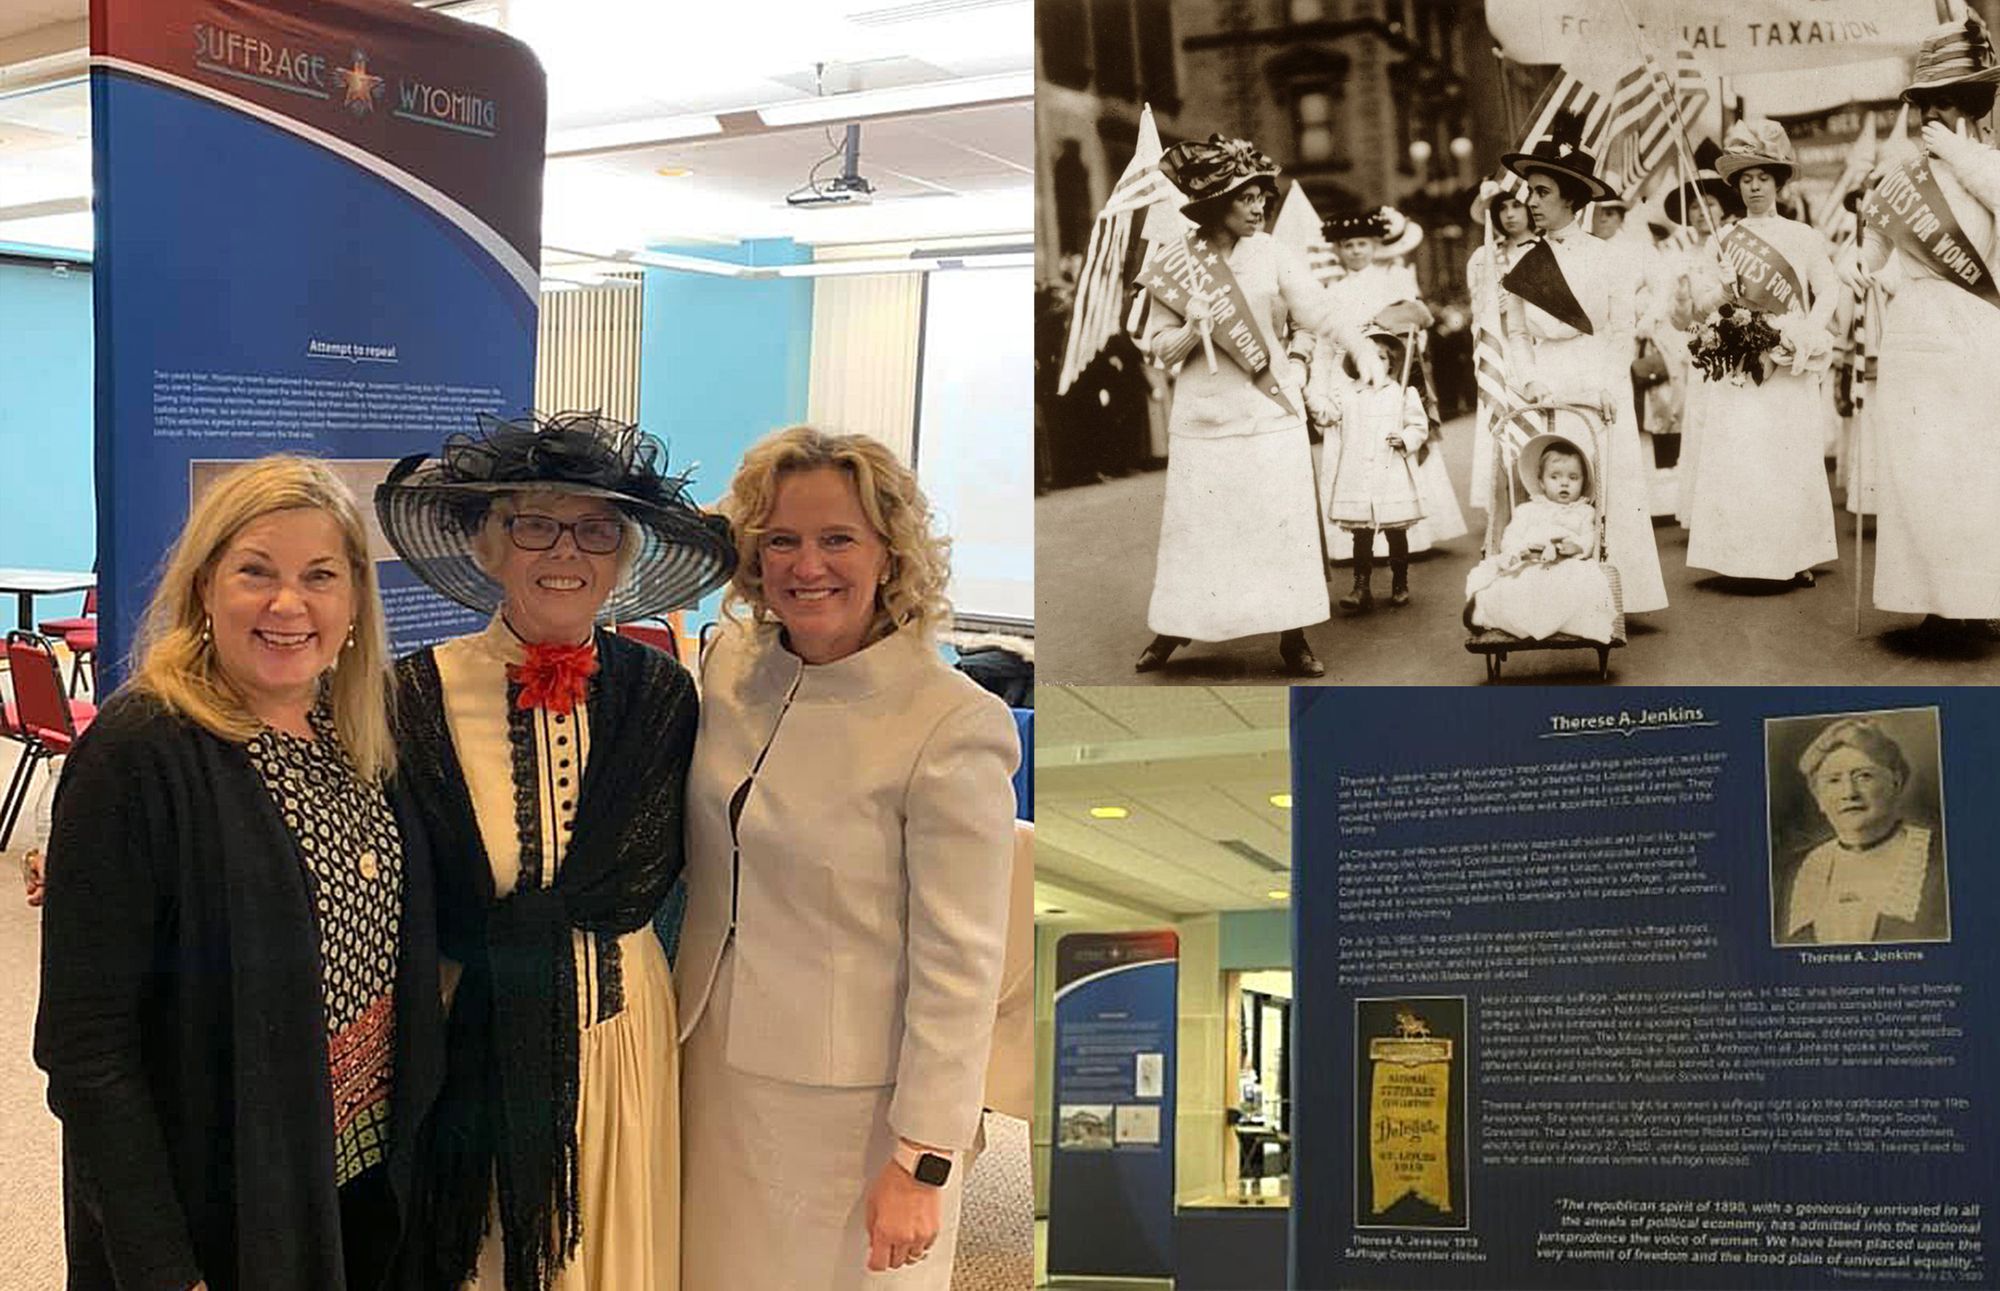 Celebrating the 150th Anniversary of the Women's Suffrage Act